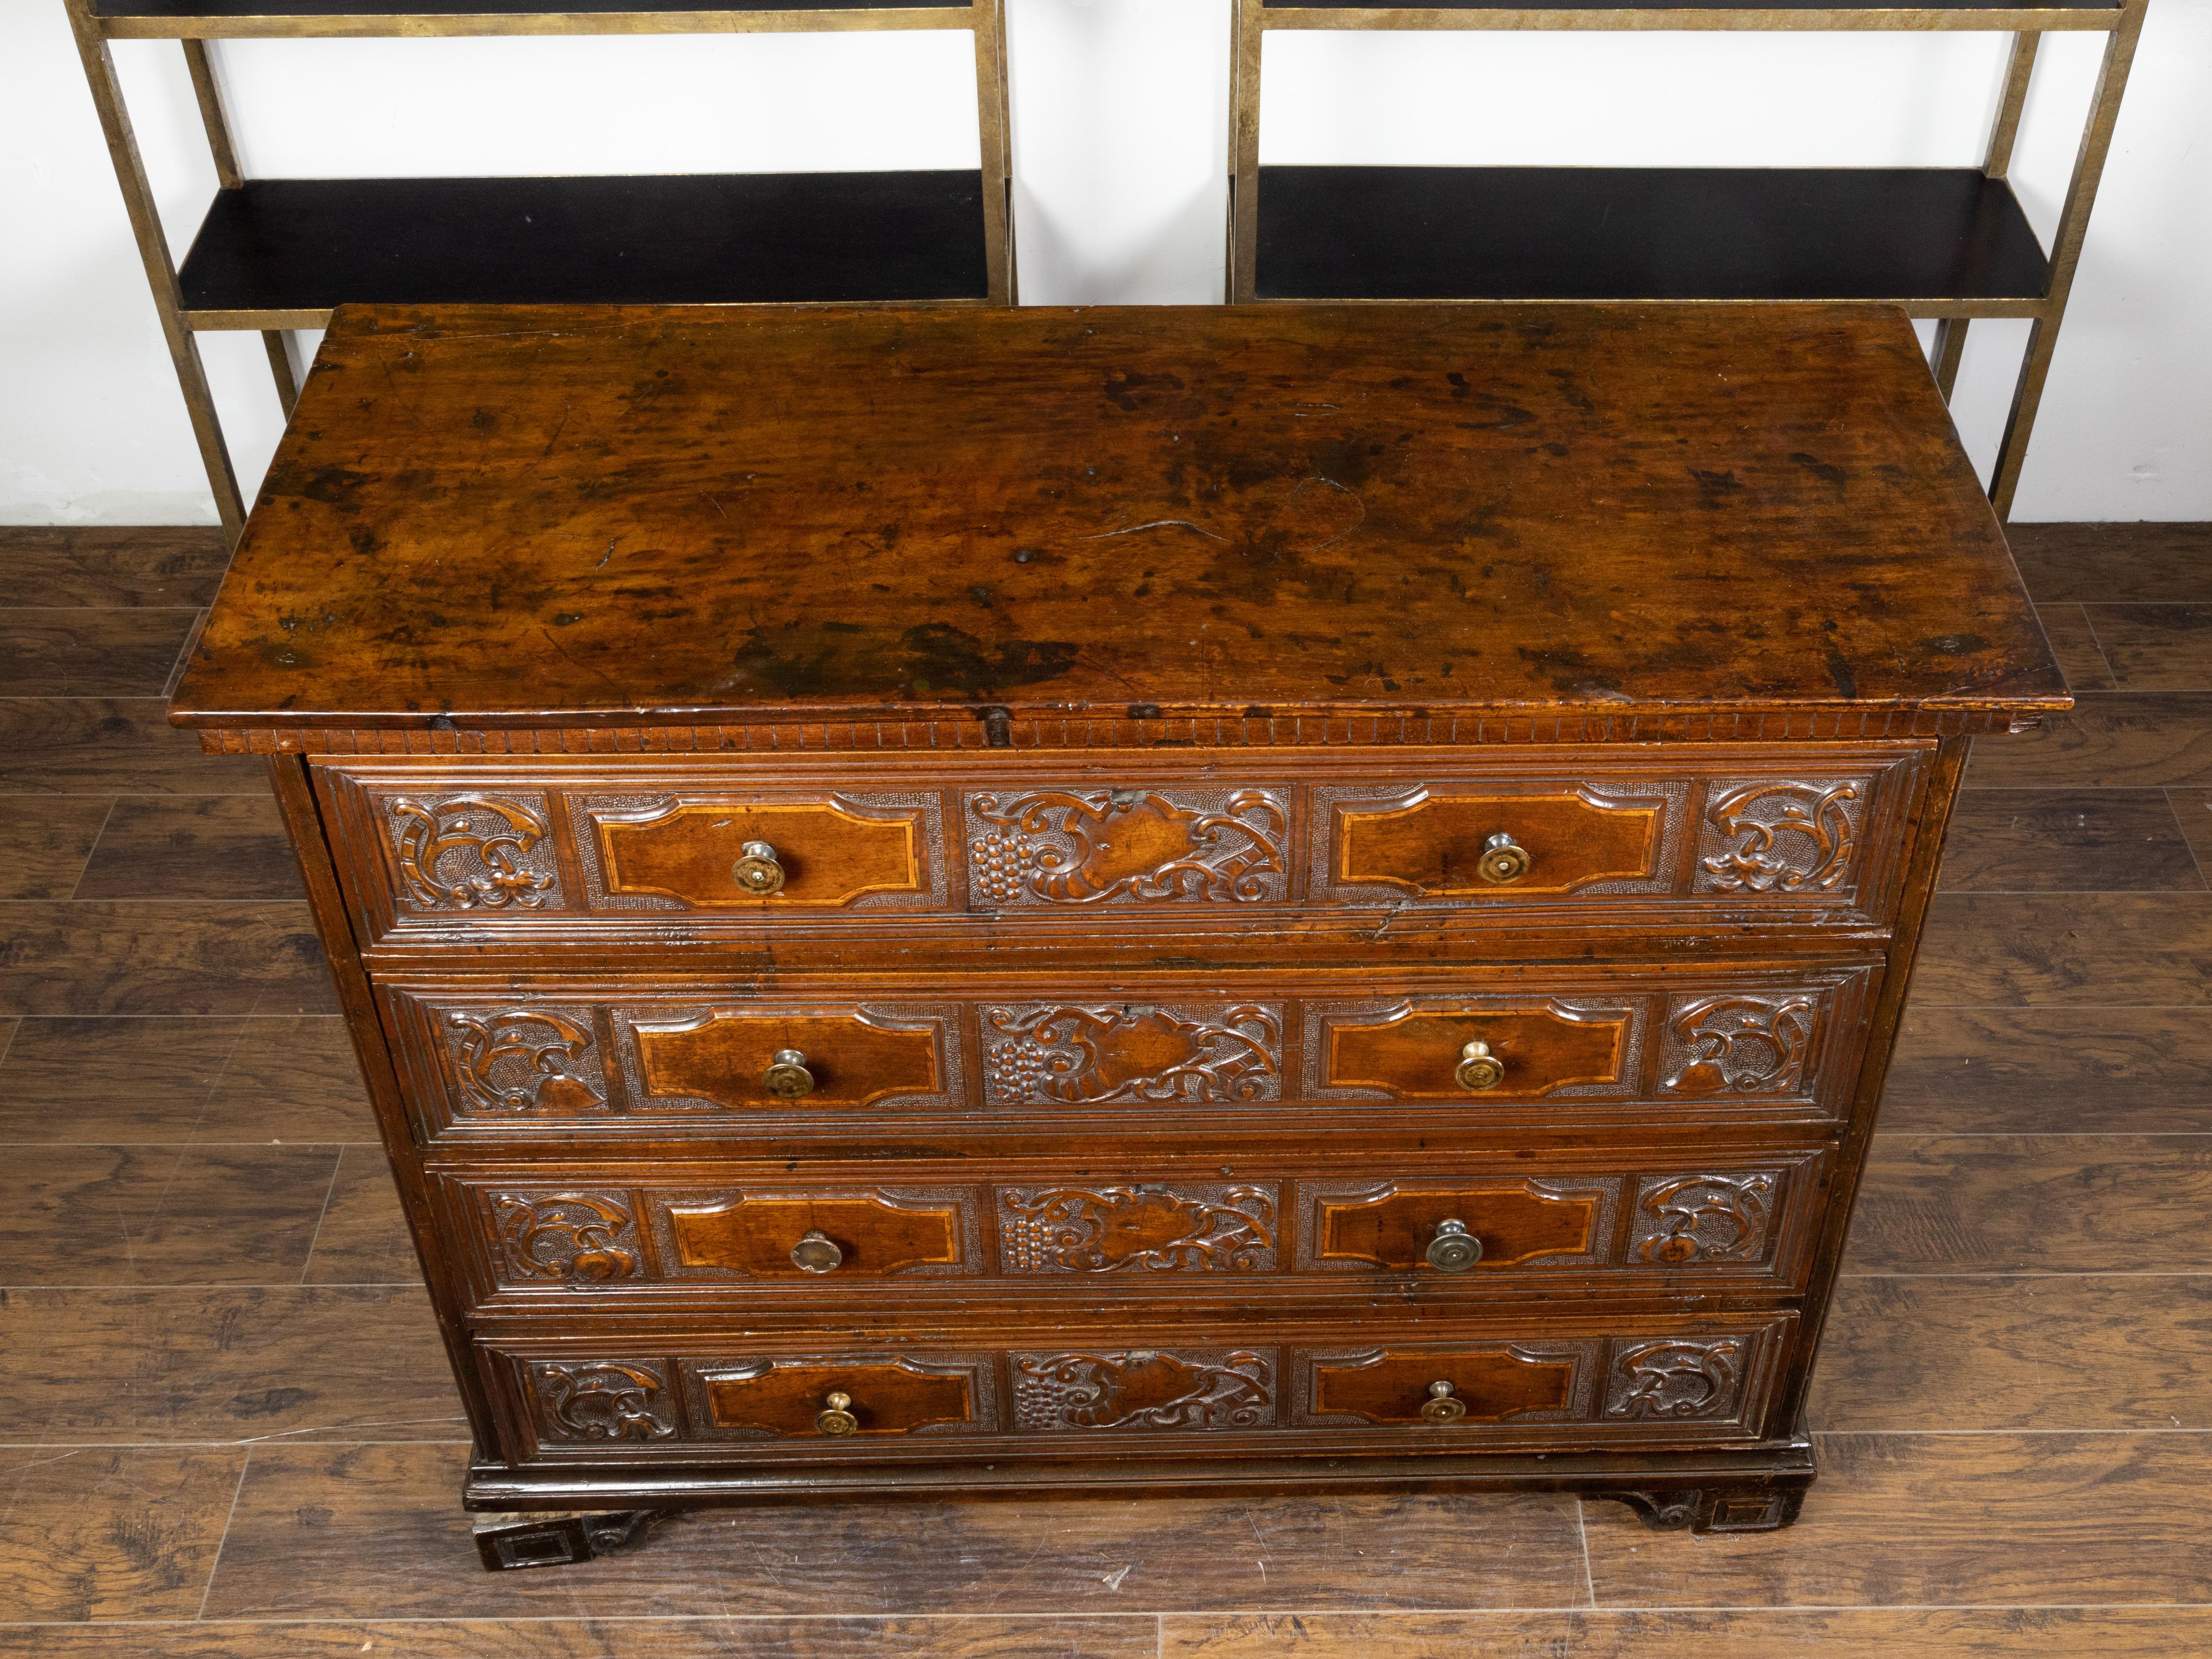 Italian 18th Century Walnut Four-Drawer Commode with Carved Scrolls and Grapes In Good Condition For Sale In Atlanta, GA